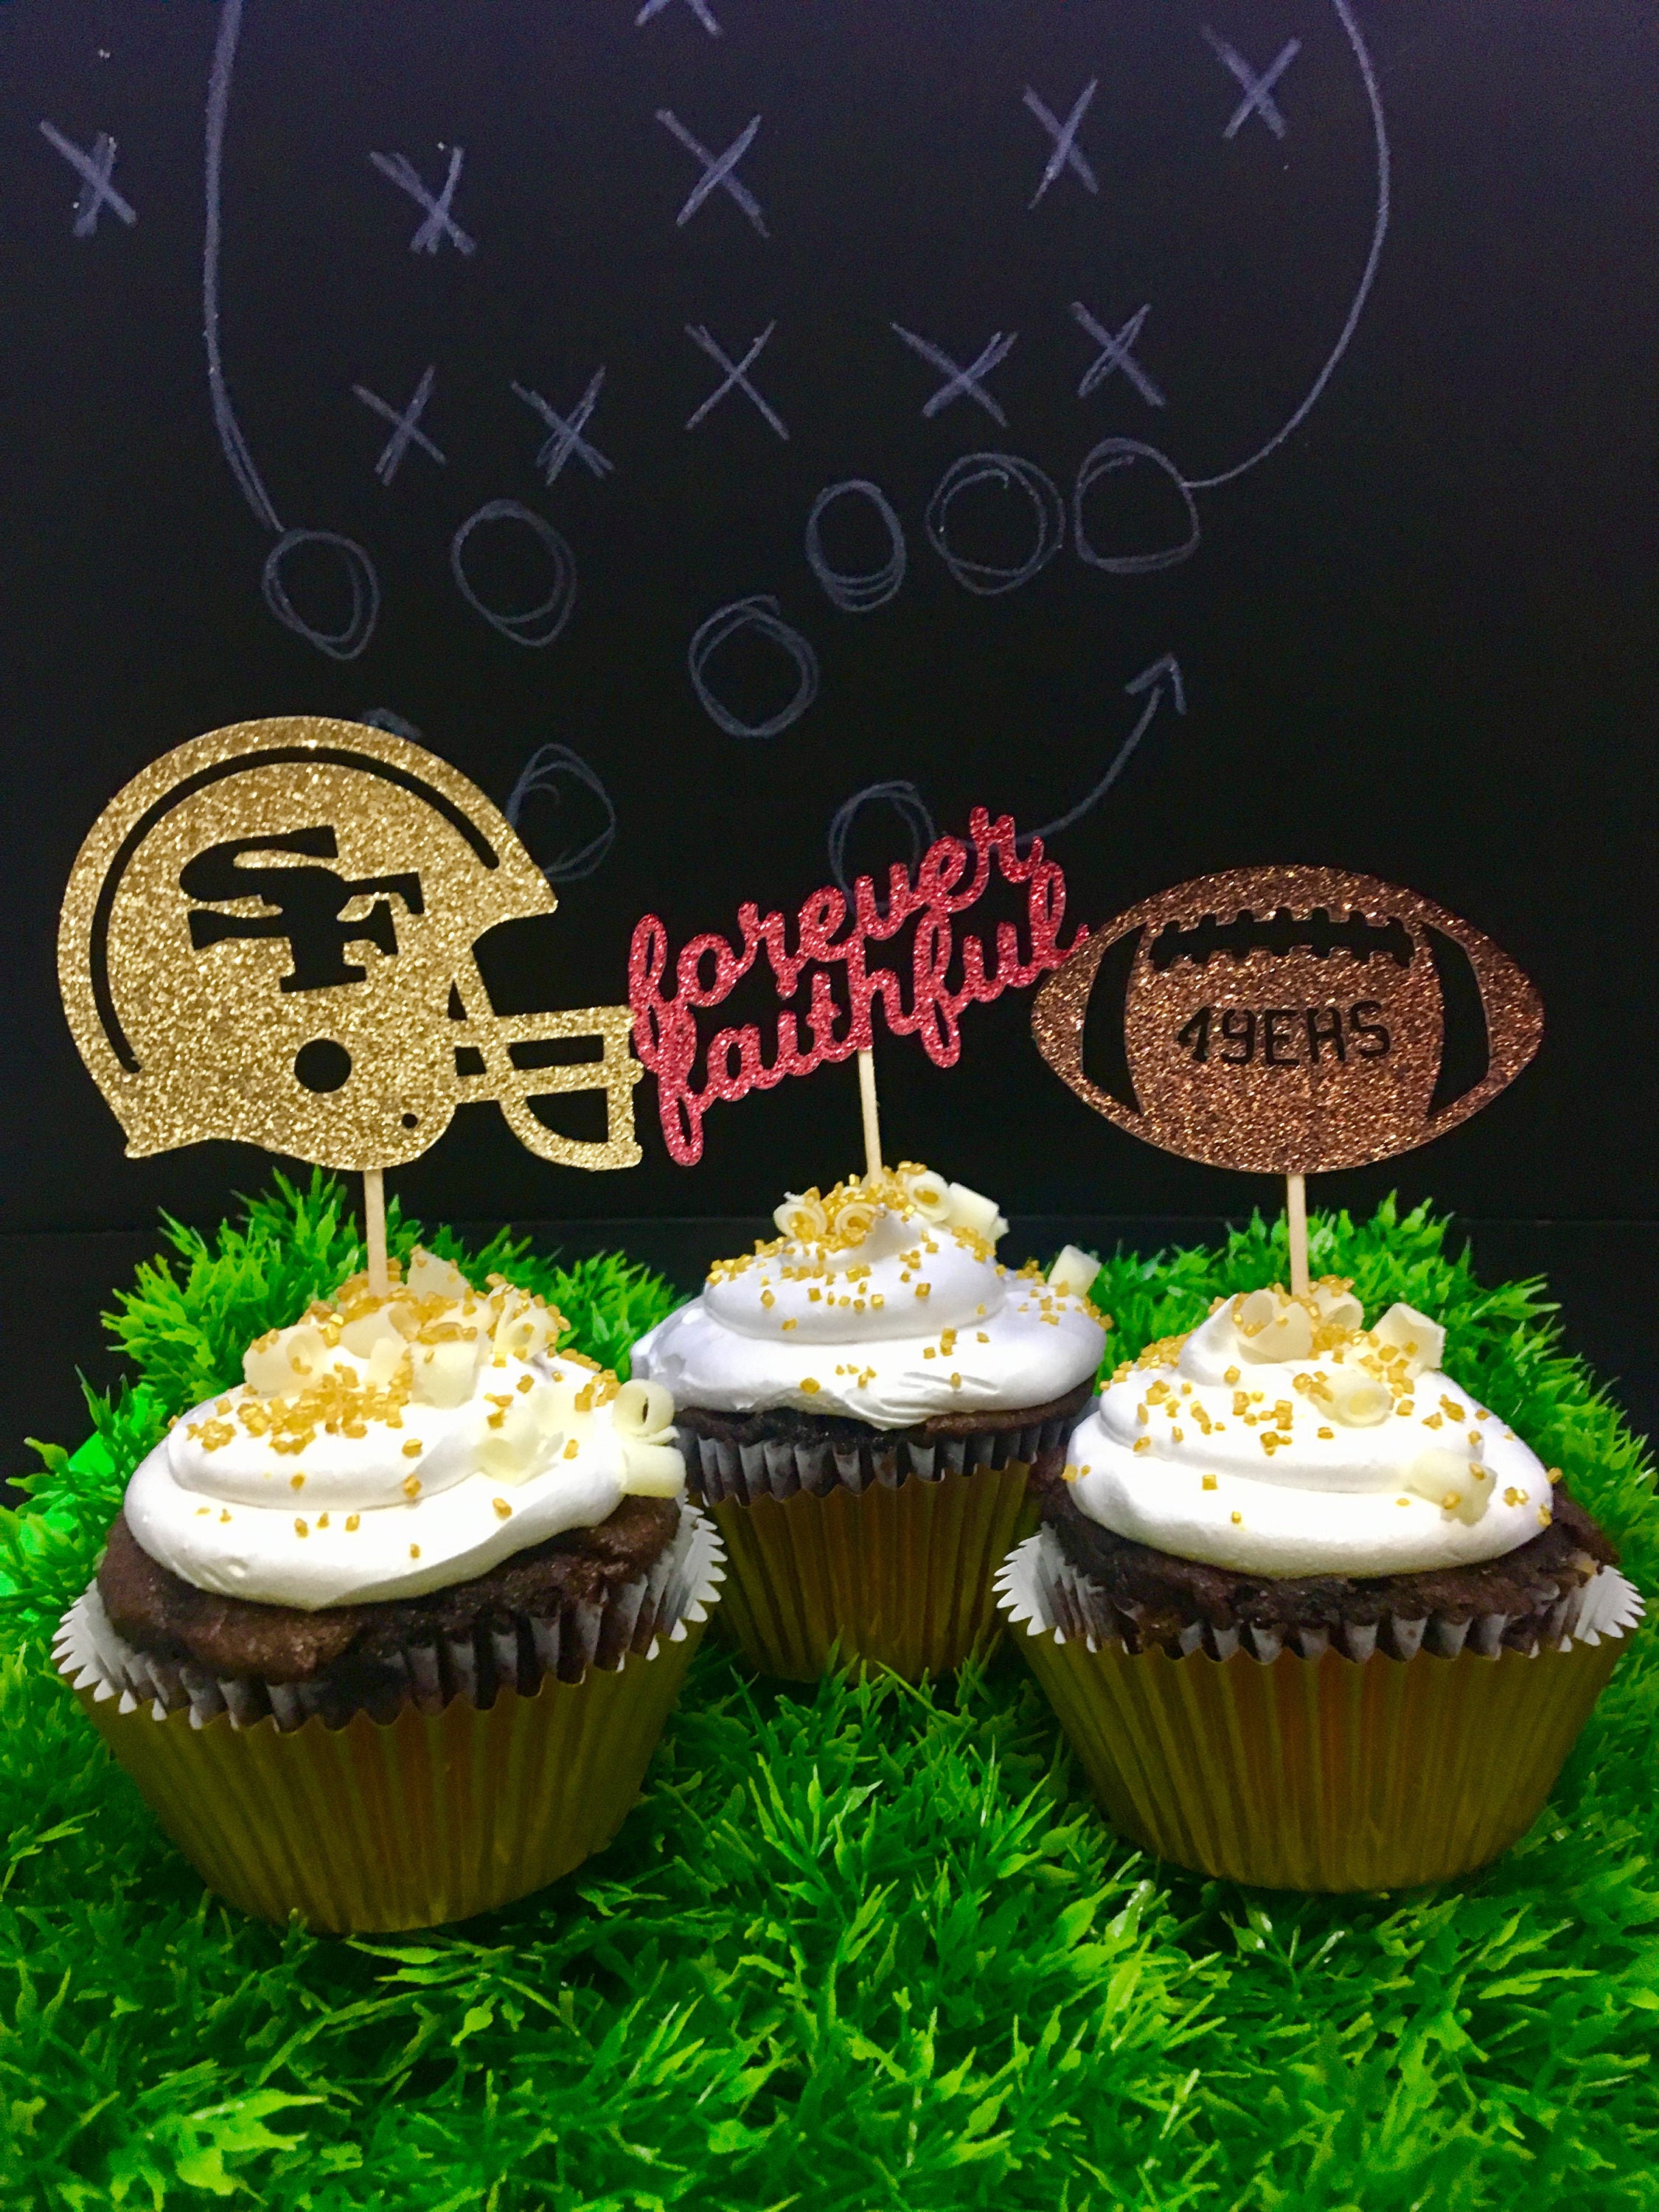 San Francisco 49ers Cake Topper Bridal Funny Humorous Wedding Day Reception  Football Team Themed Hair Color Changed 4 Free 